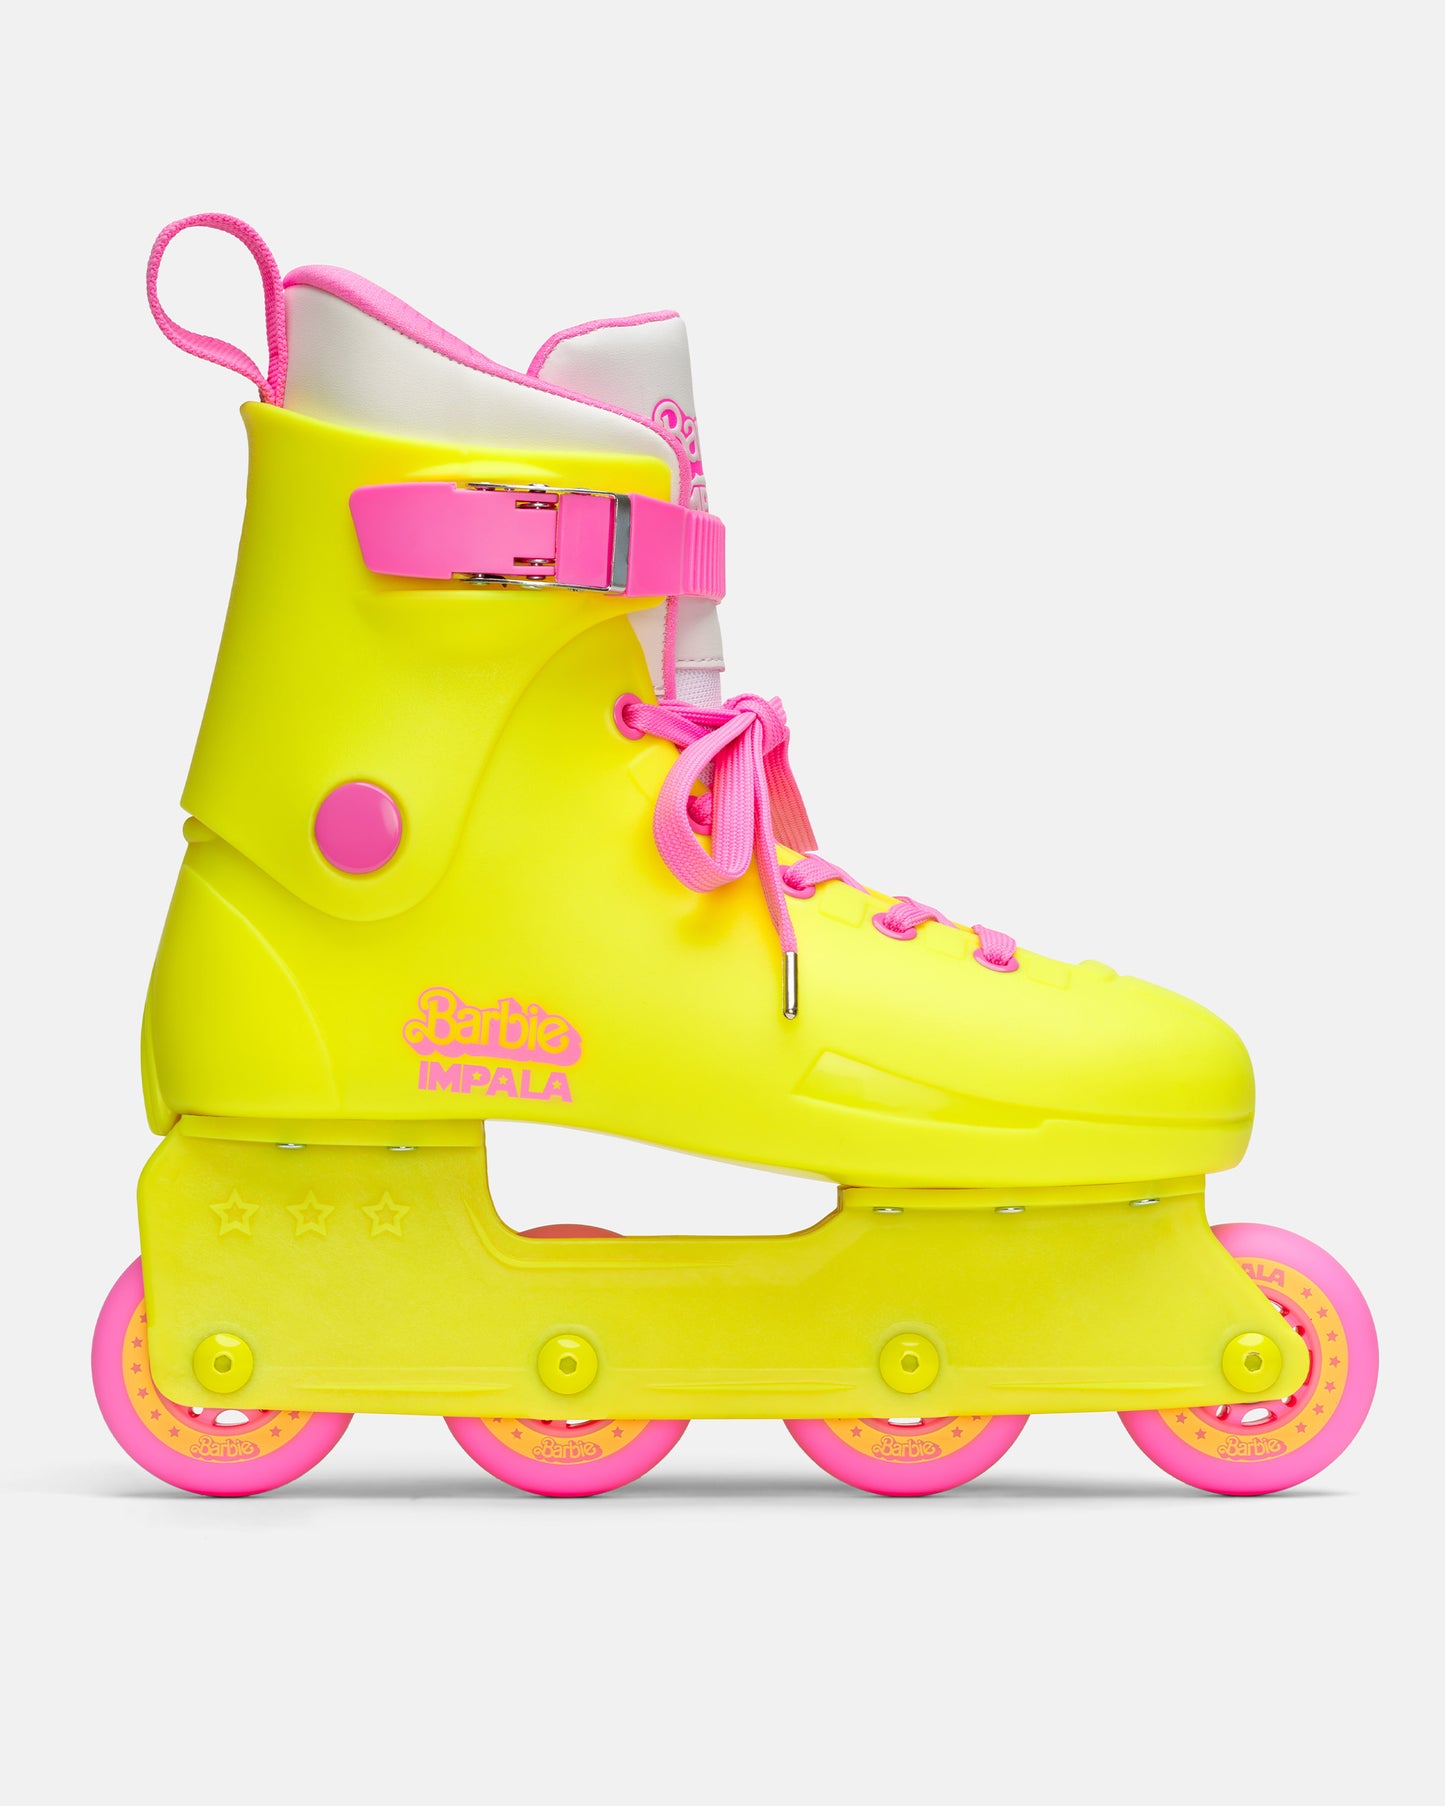 Side profile of the Impala Lightspeed Inline Skate - Barbie Bright Yellow